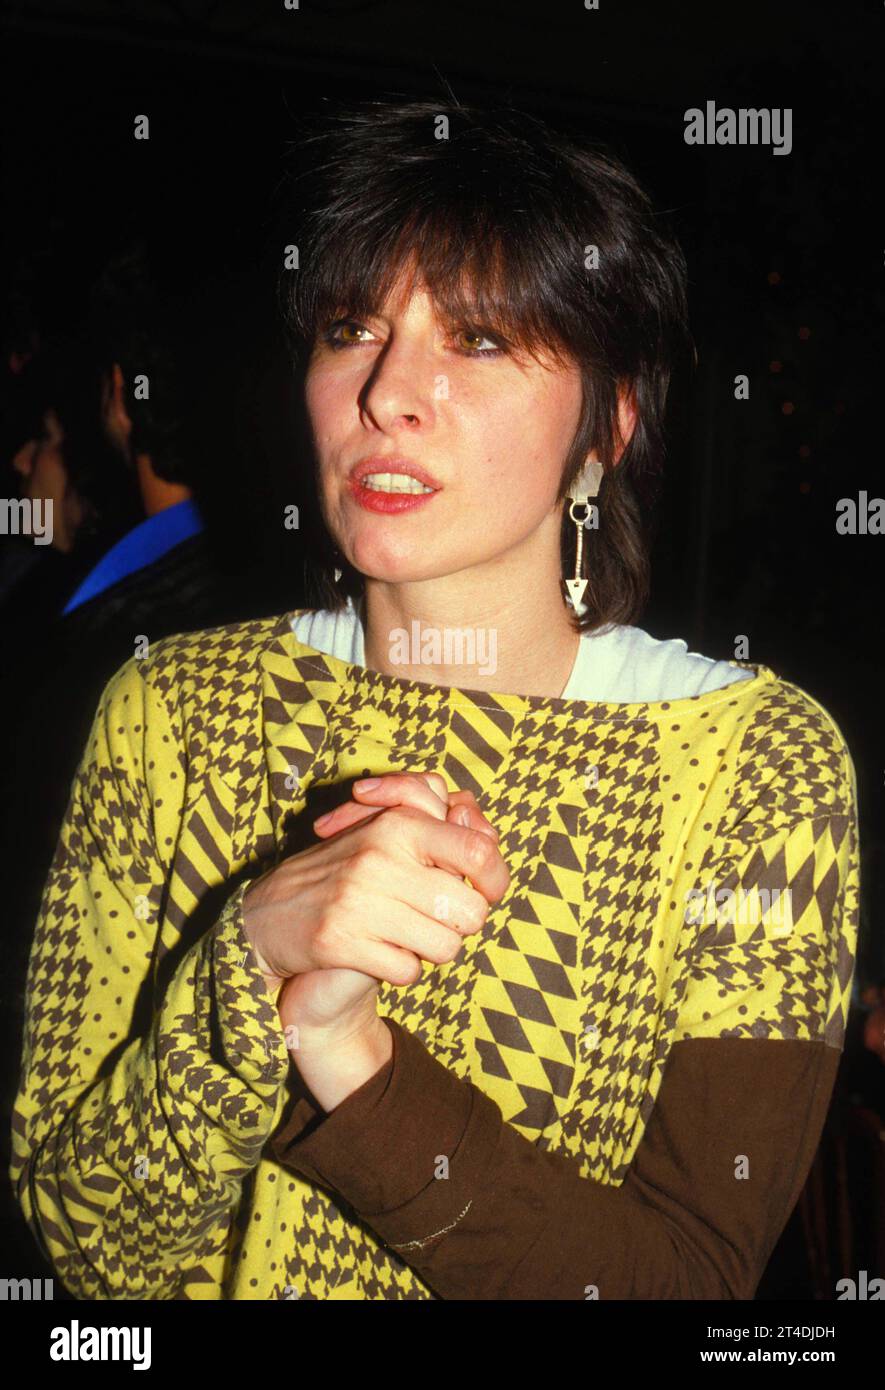 CHRISSIE HYNDE ;(born 7 September 1951) ; American-British musician ; She is a founding member and the lead vocalist, guitarist, and primary songwriter of the rock band the Pretenders ;  Credit: Lynn Mcafee / Performing Arts Images www.performingartsimages.com Stock Photo